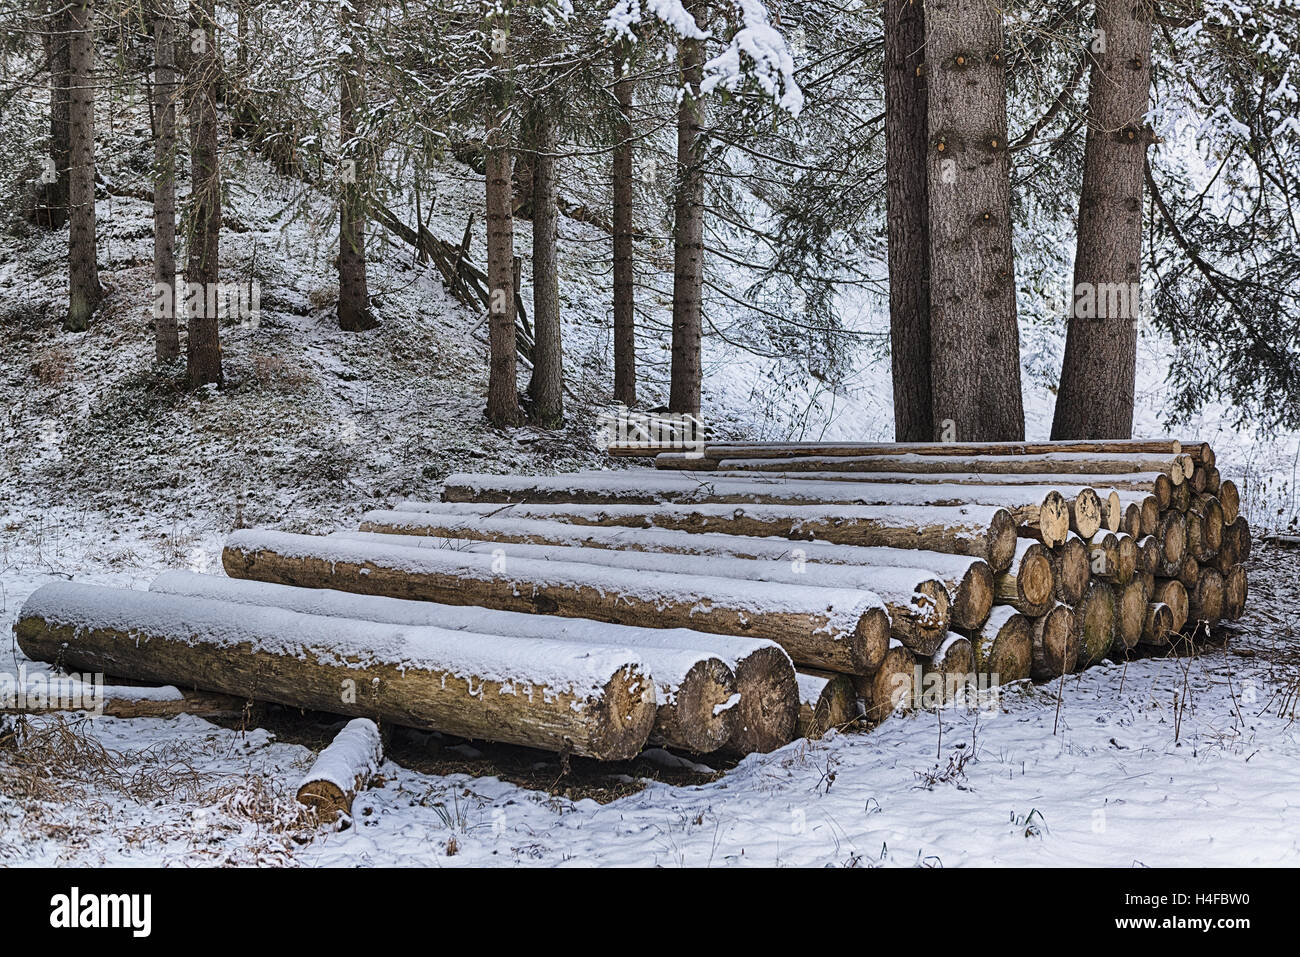 wooden trunks lined up in the snowy forest Stock Photo